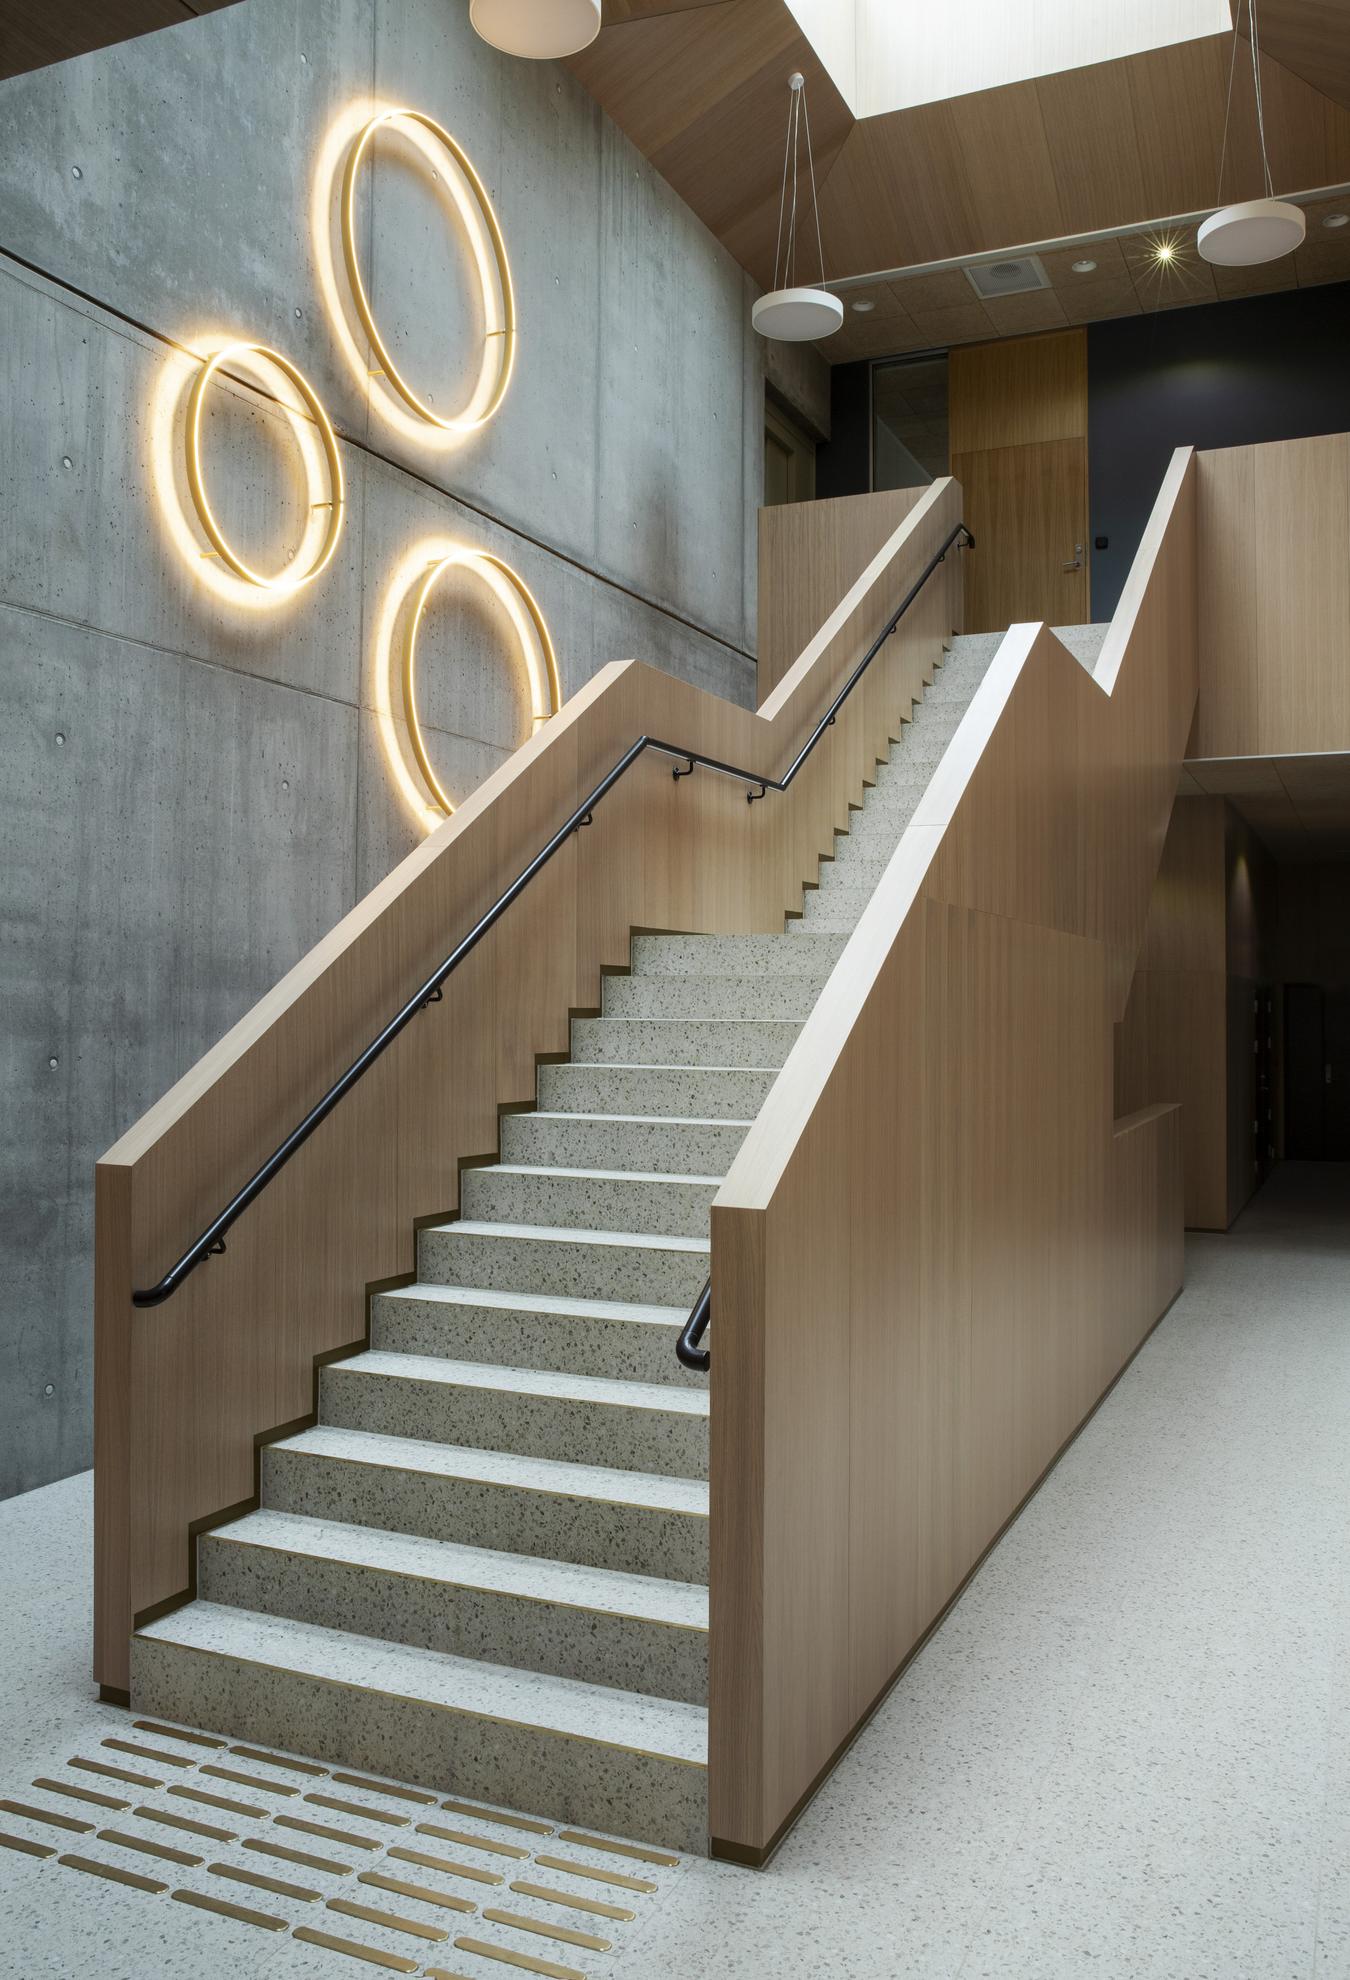 Stairs in concrete and wood. Photo